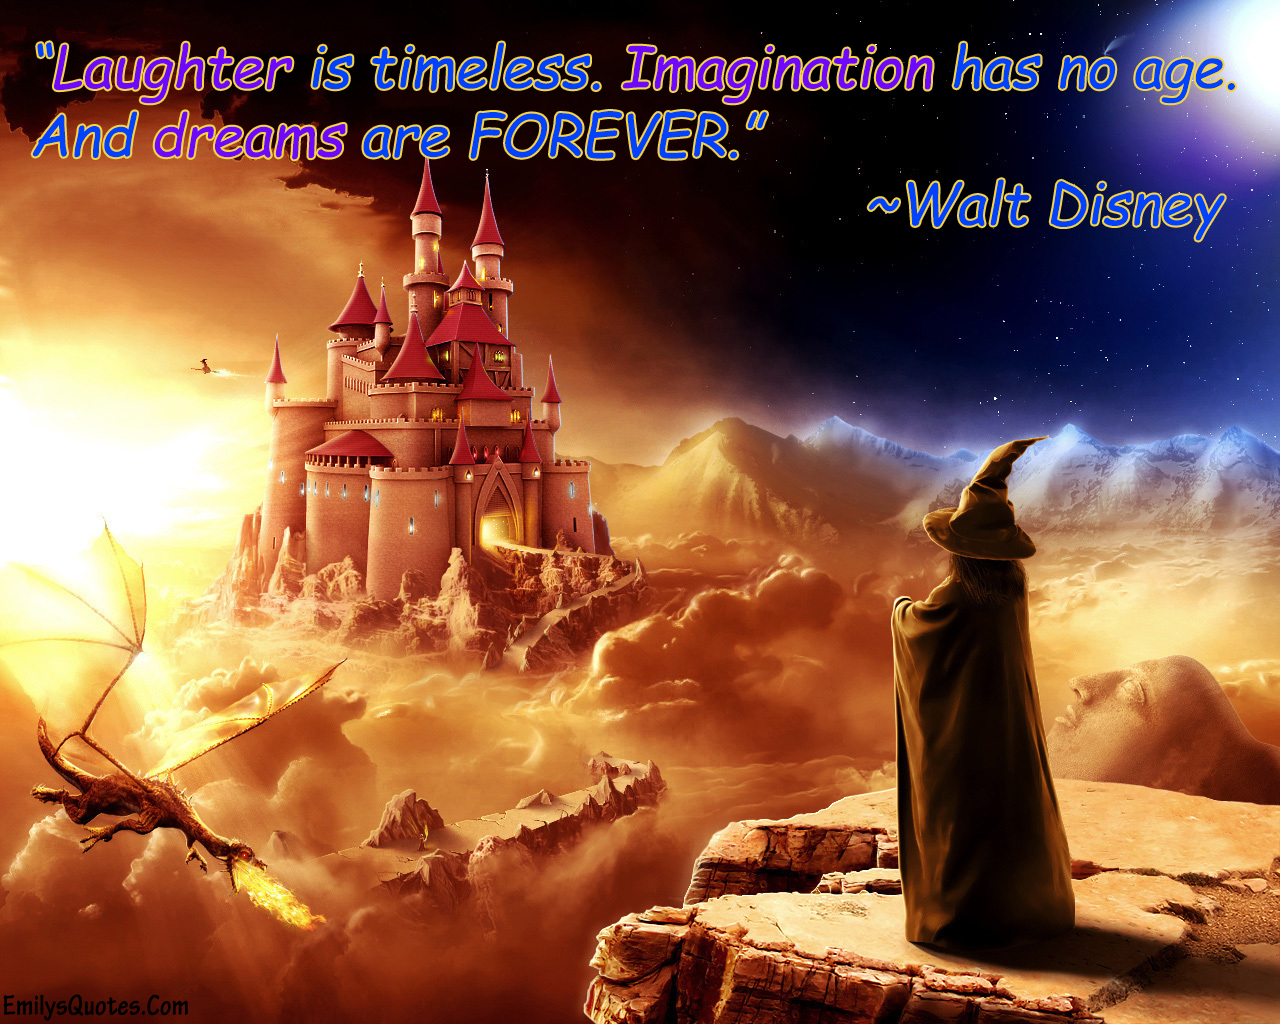 Laughter is timeless. Imagination has no age. And dreams are forever